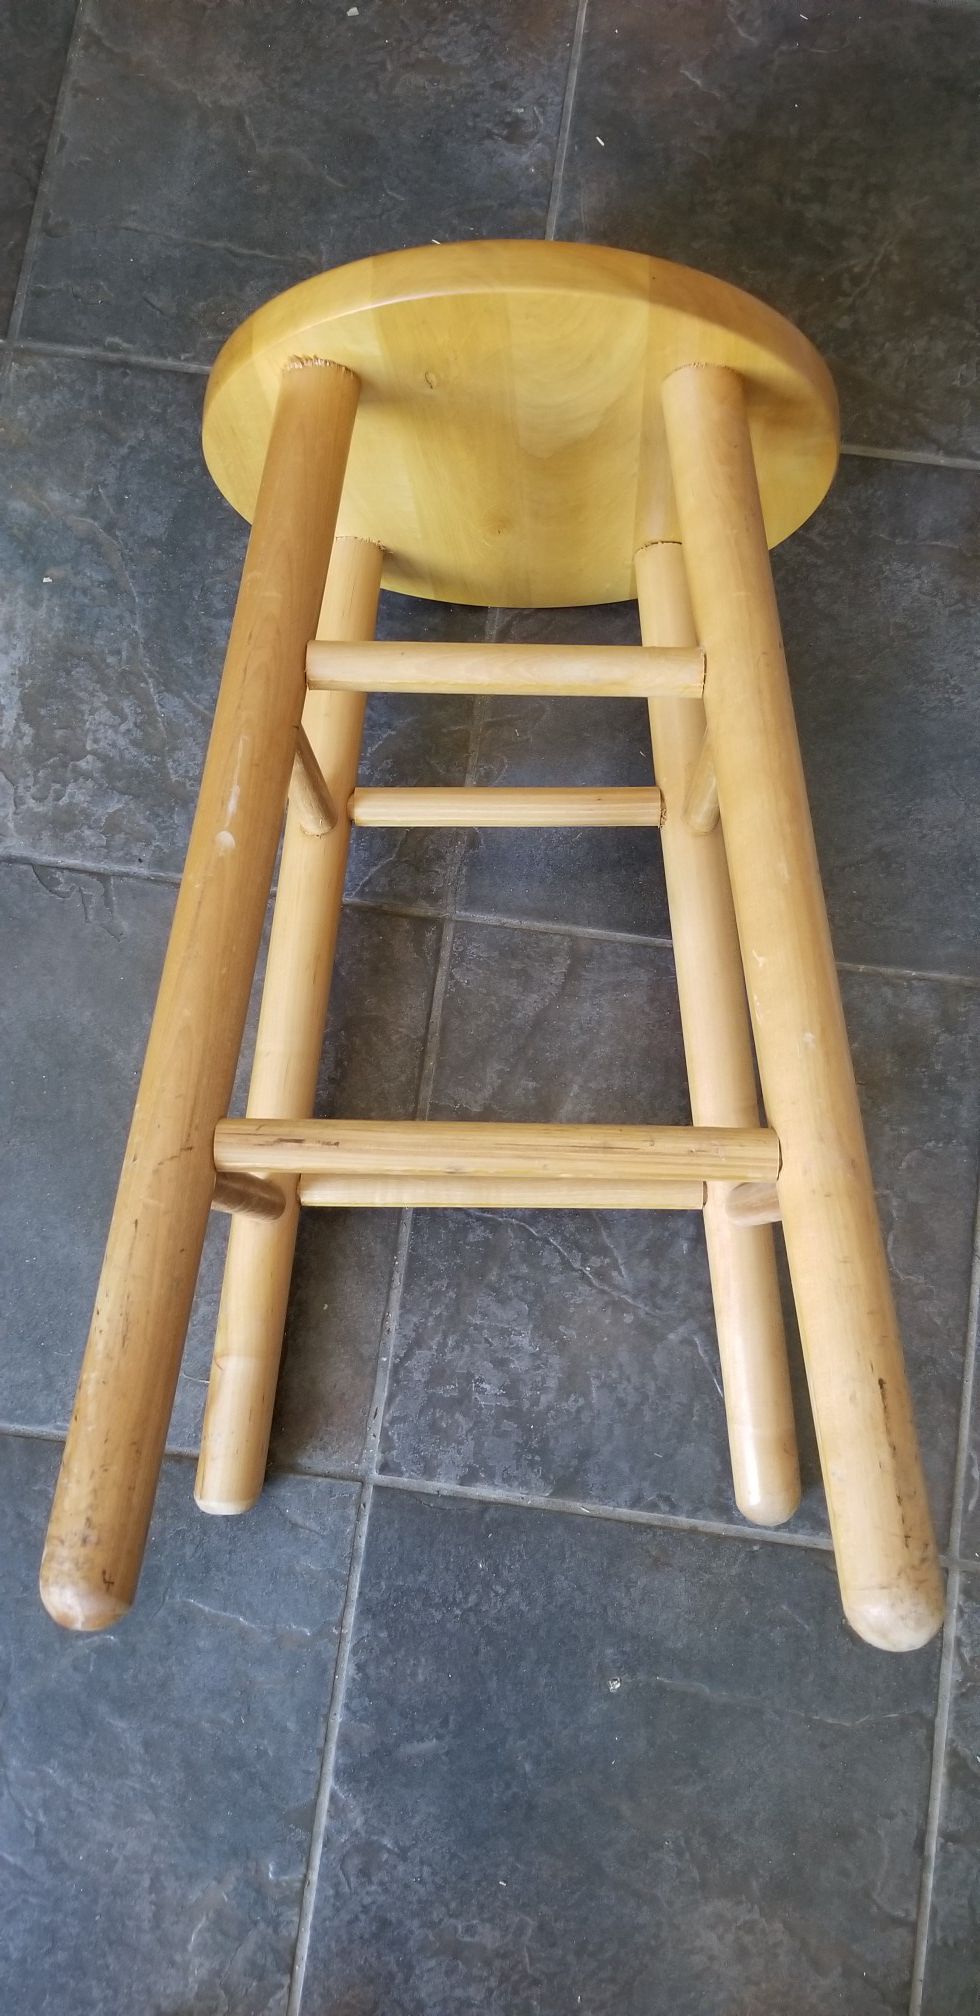 Bar stool, strong, sturdy, with pad